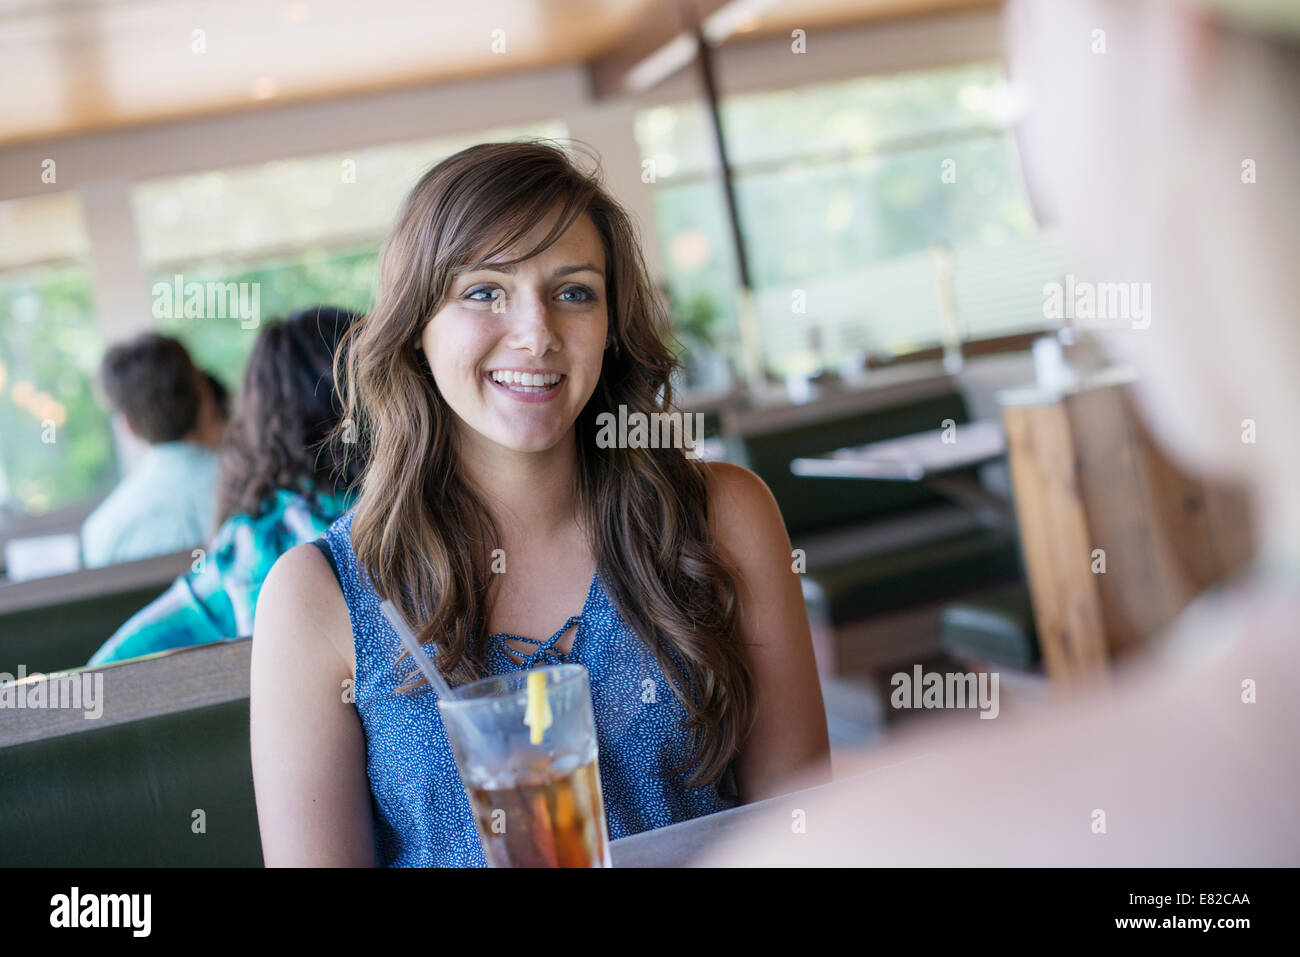 A young woman sitting at a table in a diner with a cool drink. Stock Photo